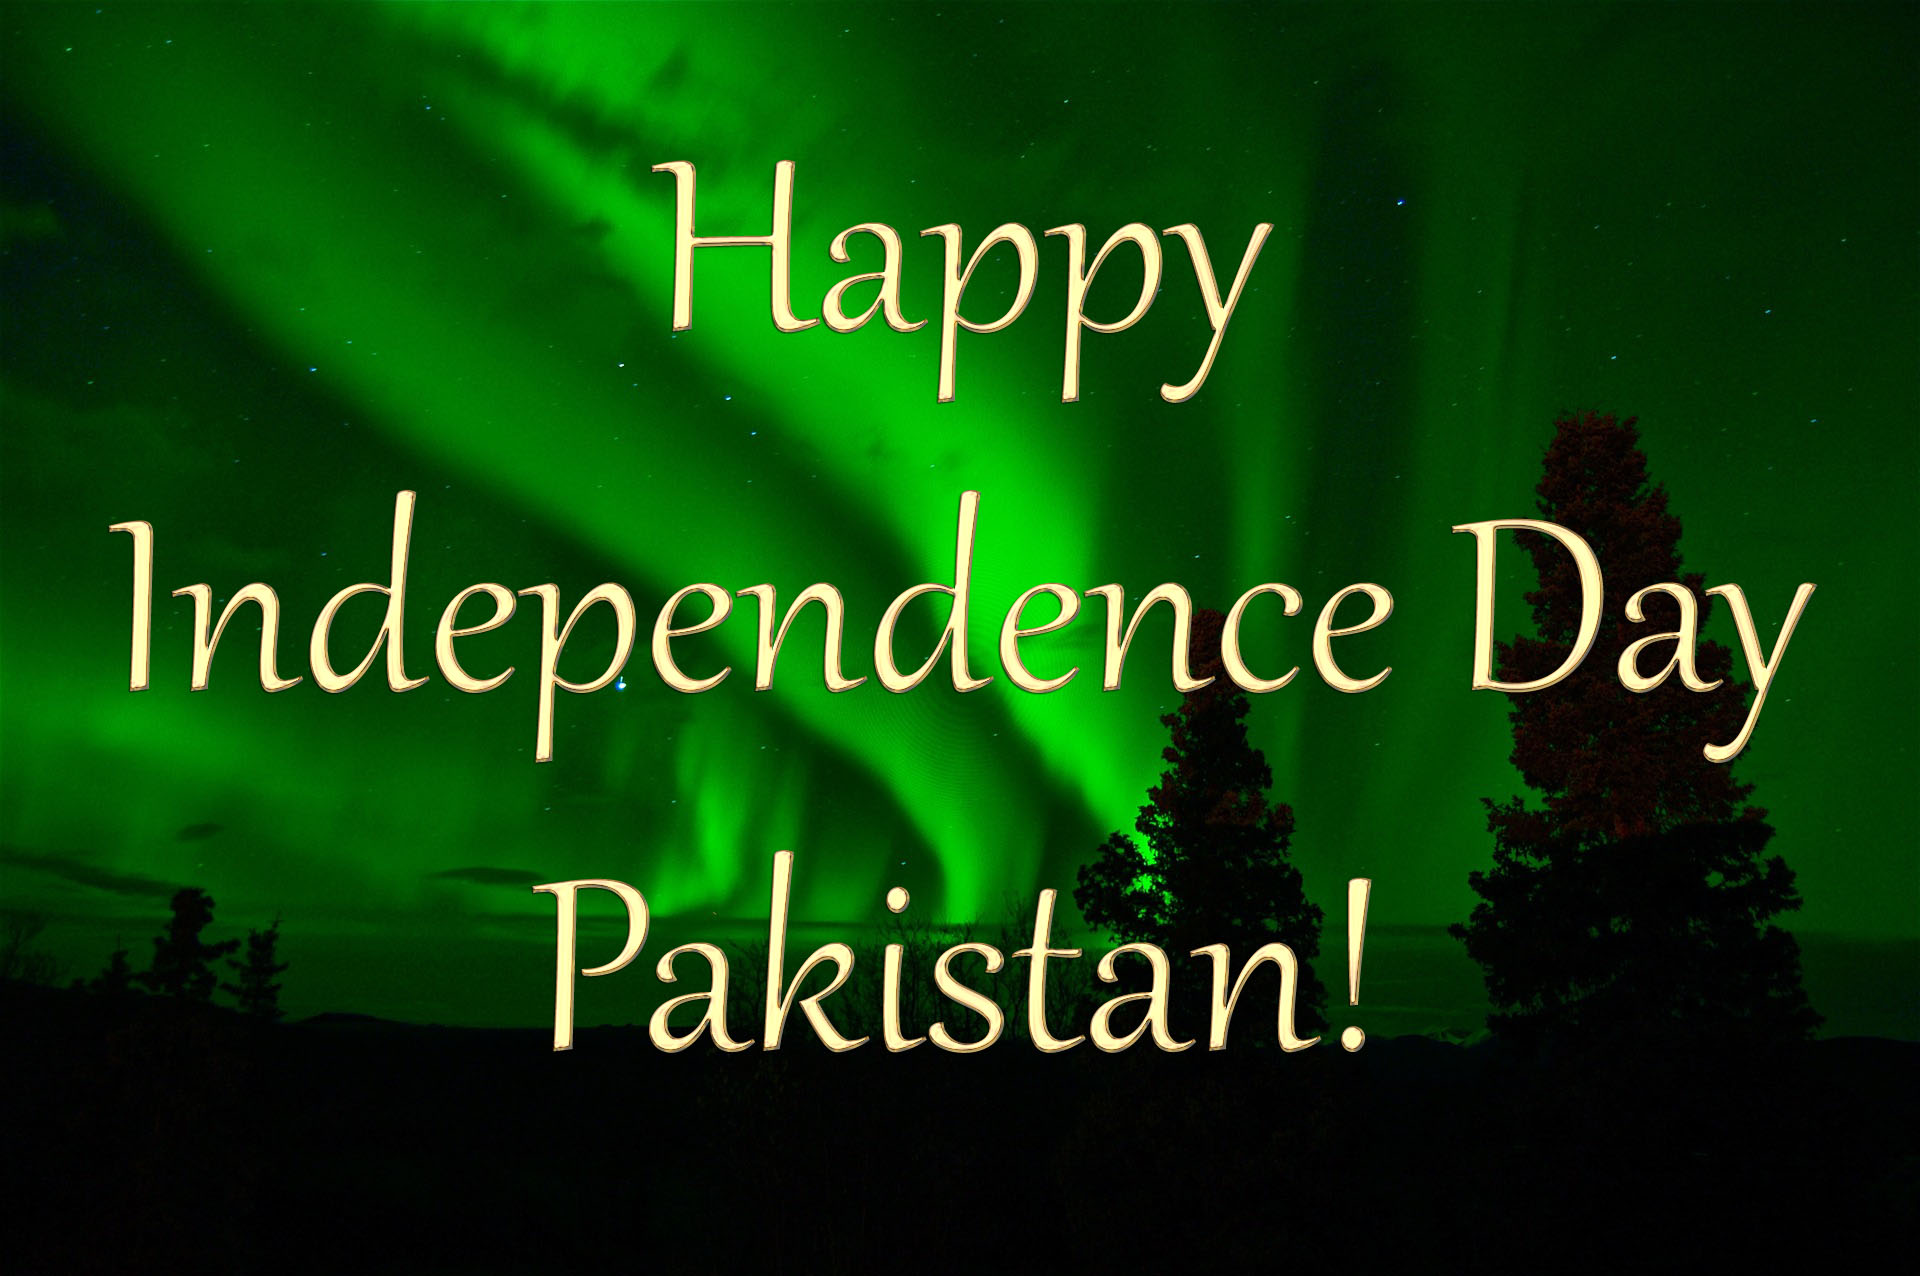 10 Perfect Pakistan Independence Day SMS And WhatsApp Messages